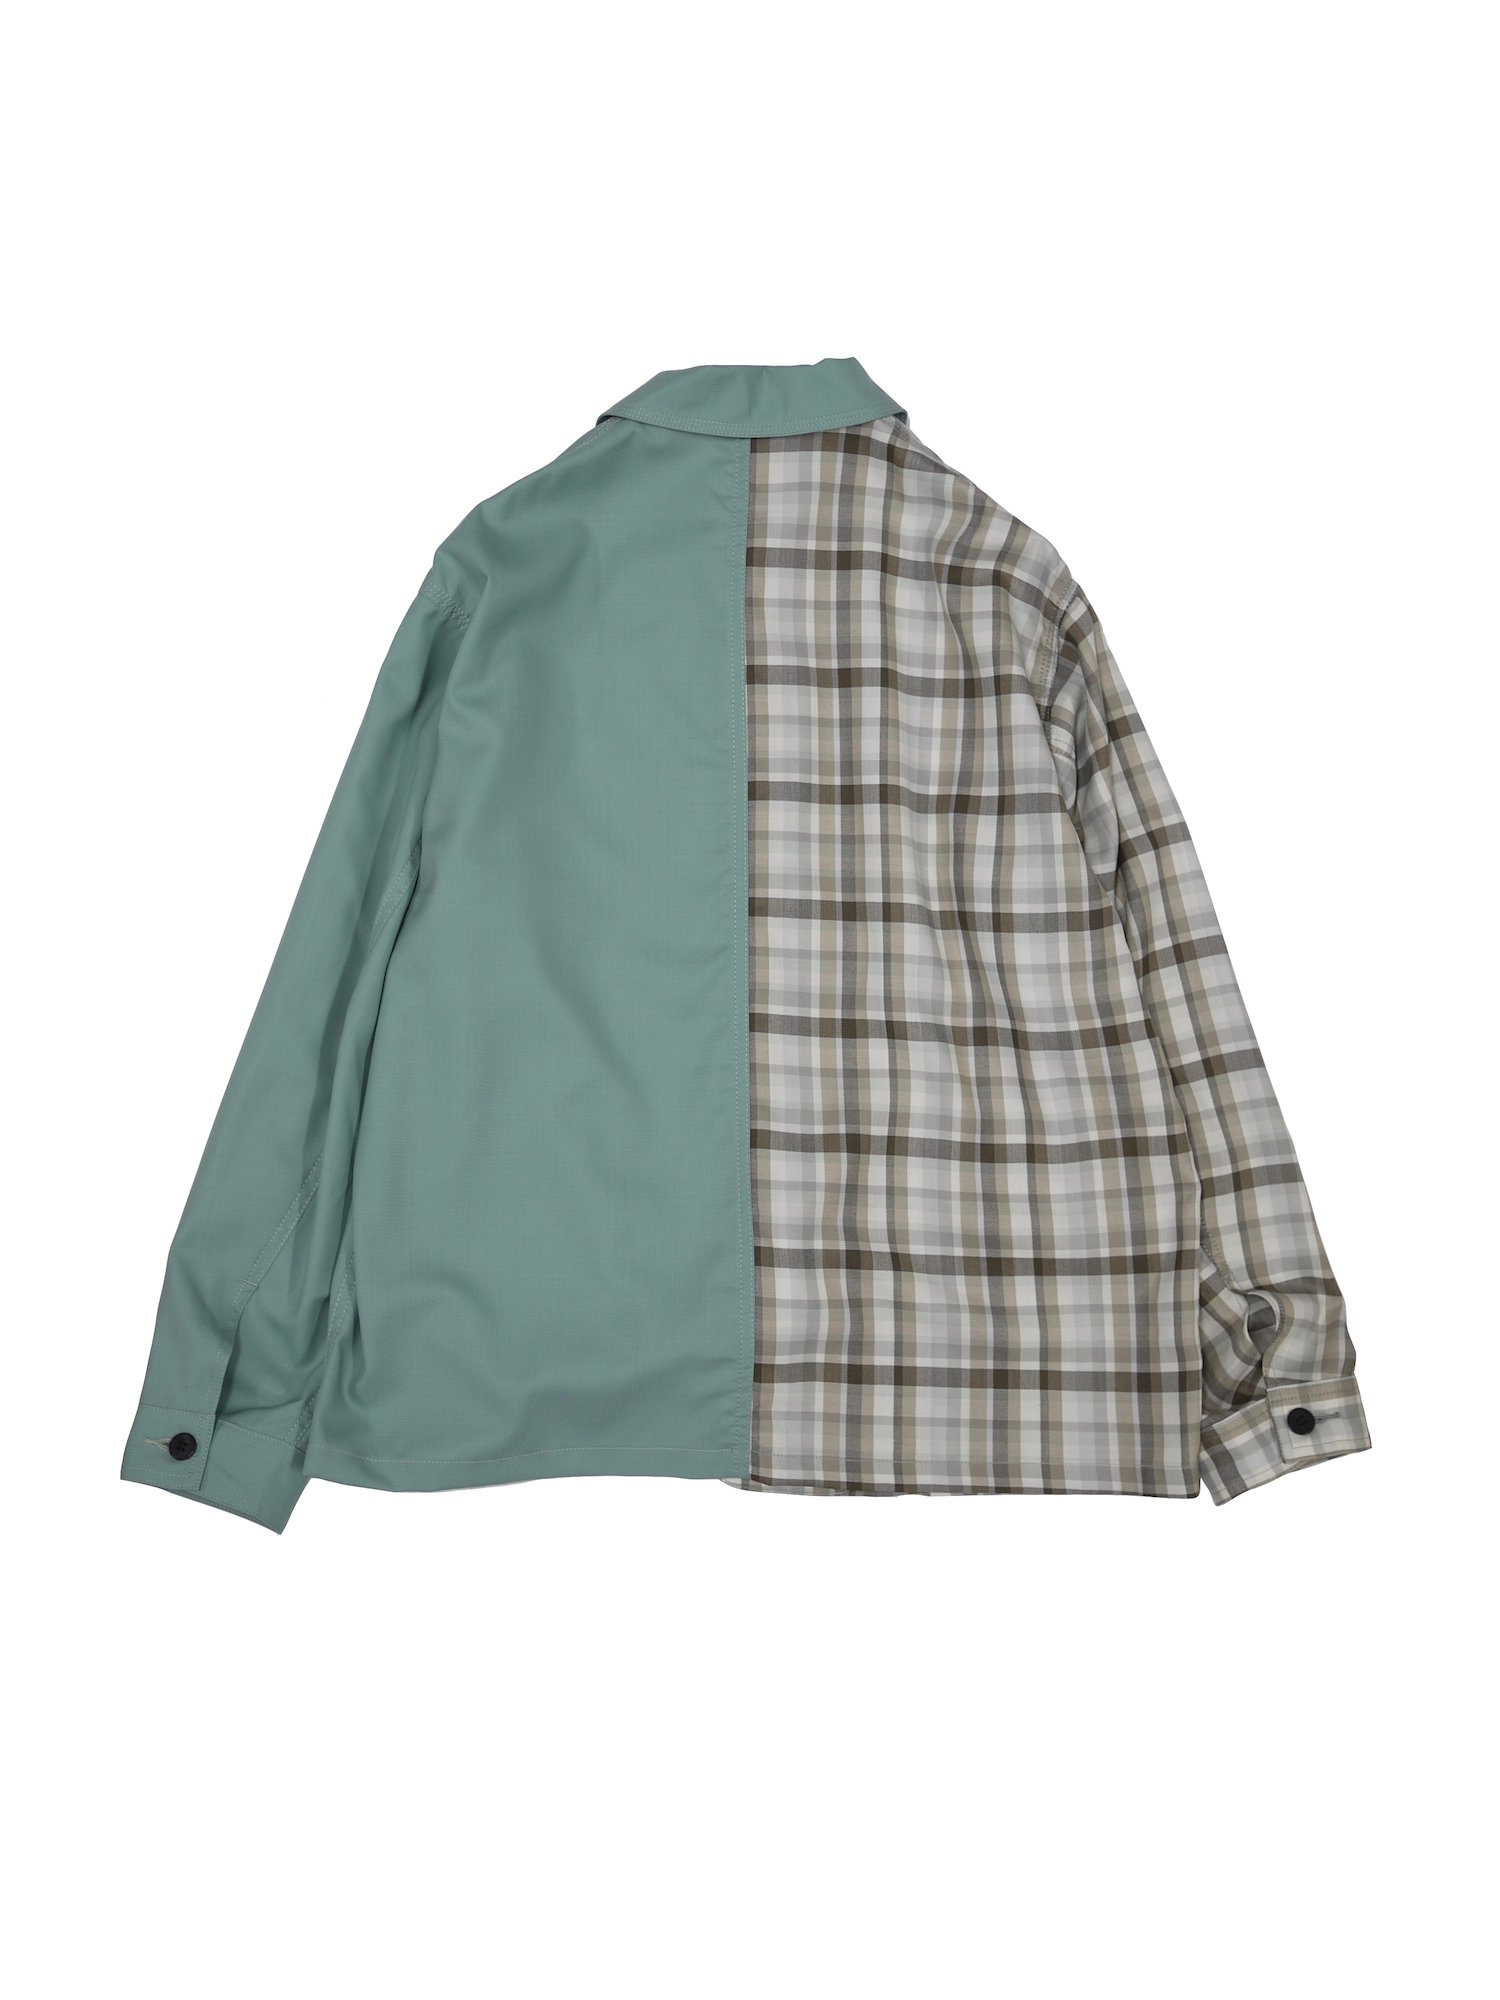 JieDa<br />SUMMER 2TONE JACKET / MINT<img class='new_mark_img2' src='https://img.shop-pro.jp/img/new/icons14.gif' style='border:none;display:inline;margin:0px;padding:0px;width:auto;' />